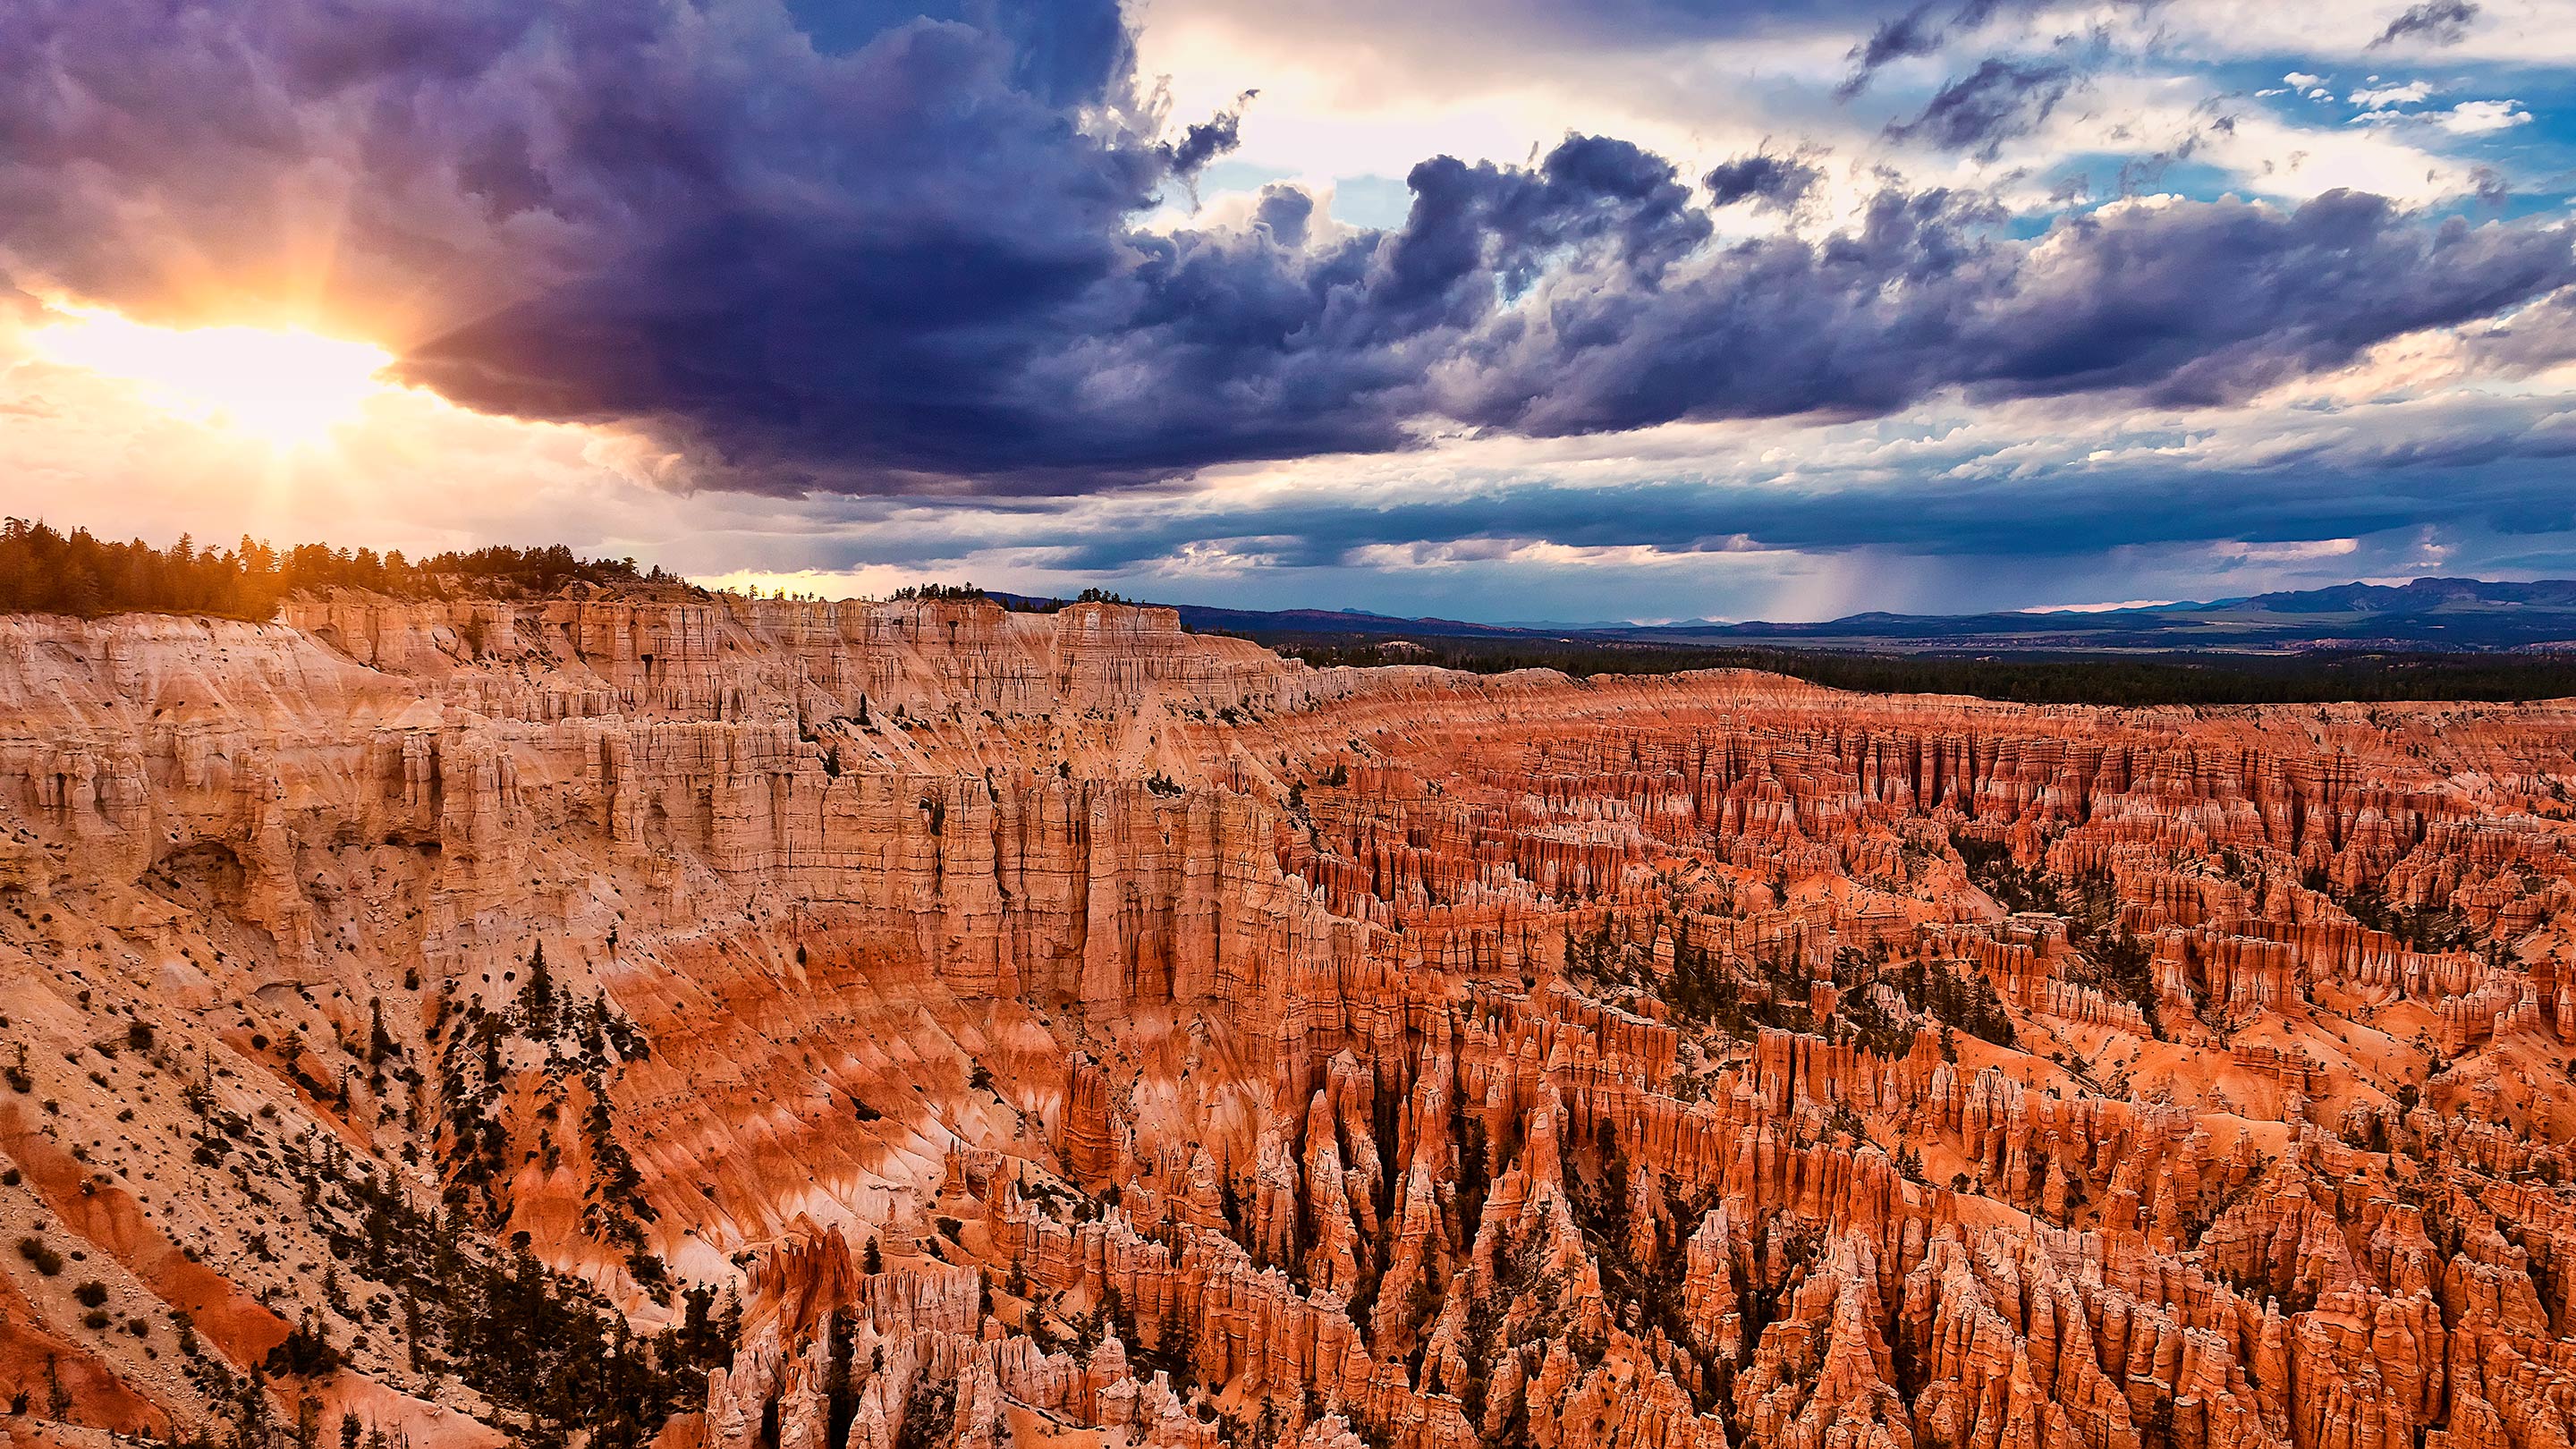 Fine Art Limited Edition Print Wall Corporate Decoration Interior Design Paul Reiffer Photographer Photography High End Landscape Cityscape Buy Rock Of Ages Bryce Canyon